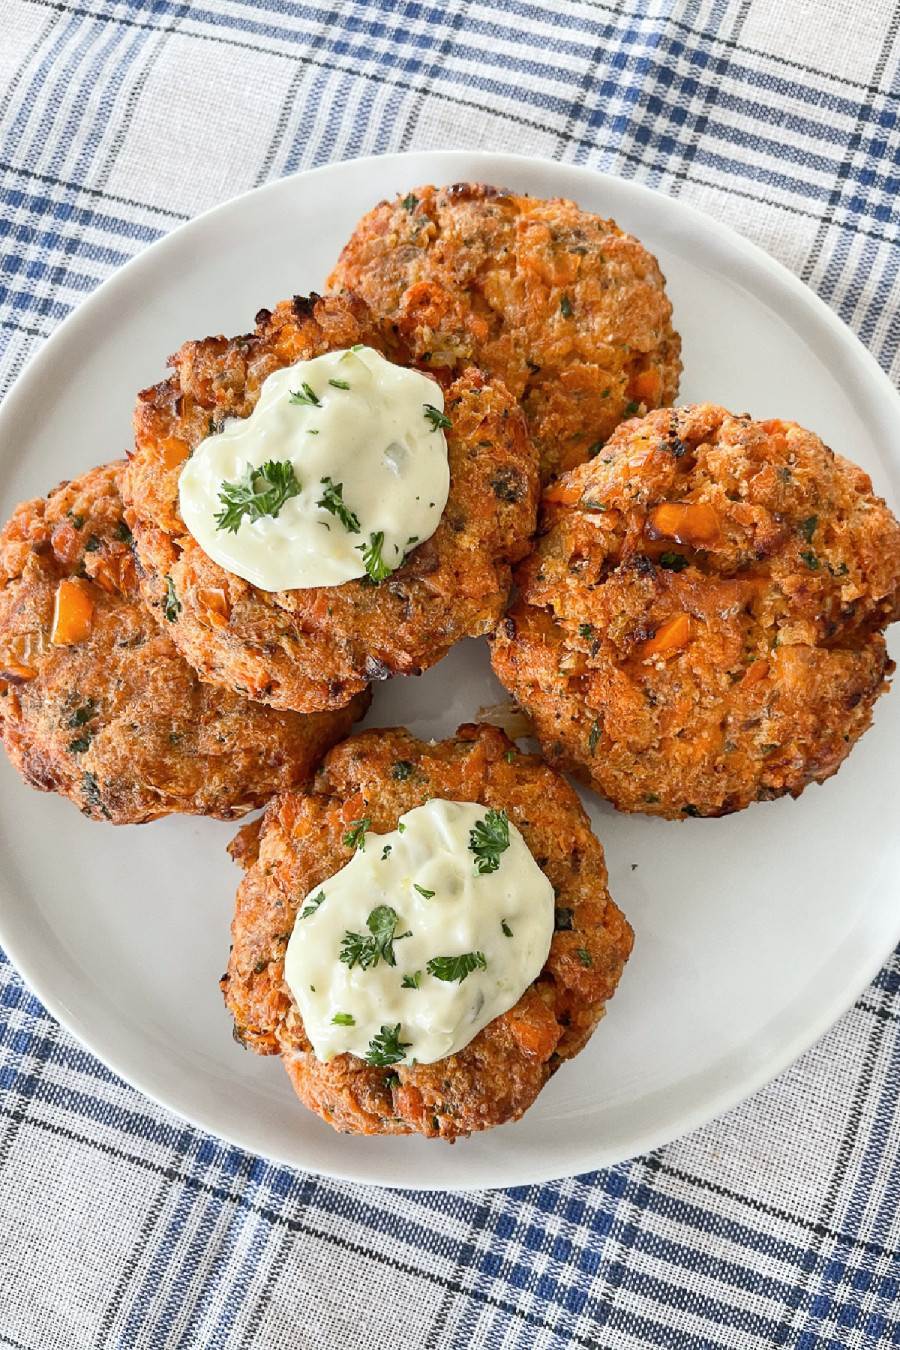 HEALTHY AND DELICIOUS AIR FRYER SALMON CAKES